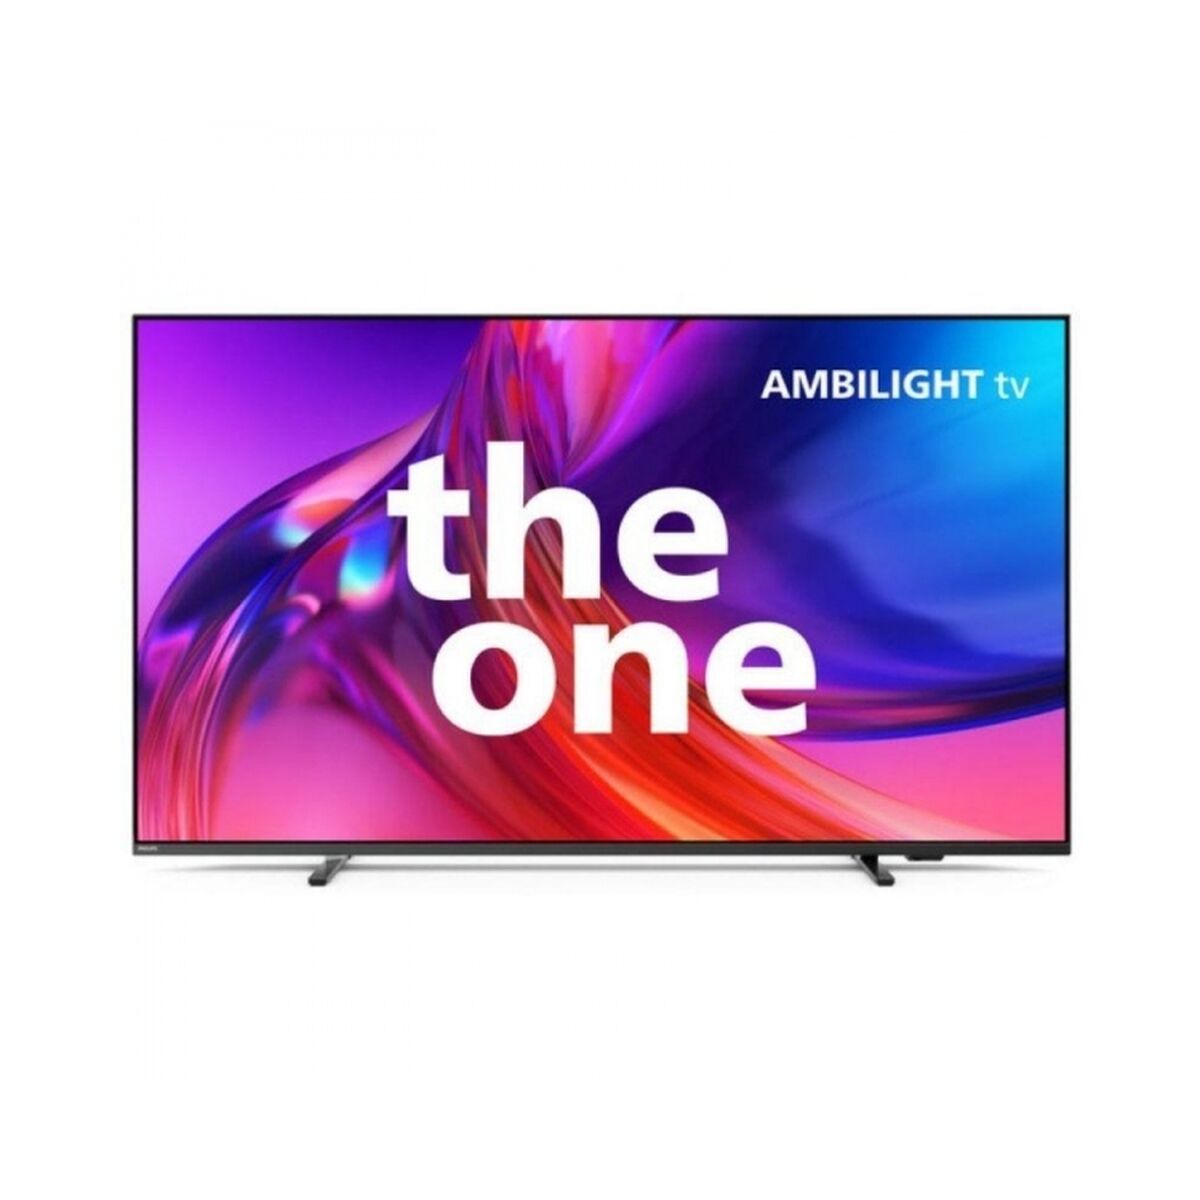 Smart TV Philips 50PUS8558 Wi-Fi LED 50" 4K Ultra HD D-LED AMD FreeSync, Philips, Electronics, TV, Video and home cinema, smart-tv-philips-50pus8558-wi-fi-led-50-4k-ultra-hd, :50 INCHES or 127 CM, :AMD Freesync, :Direct LED, :Ultra HD, Brand_Philips, category-reference-2609, category-reference-2625, category-reference-2931, category-reference-t-18805, category-reference-t-19653, cinema and television, Condition_NEW, entertainment, Price_500 - 600, RiotNook